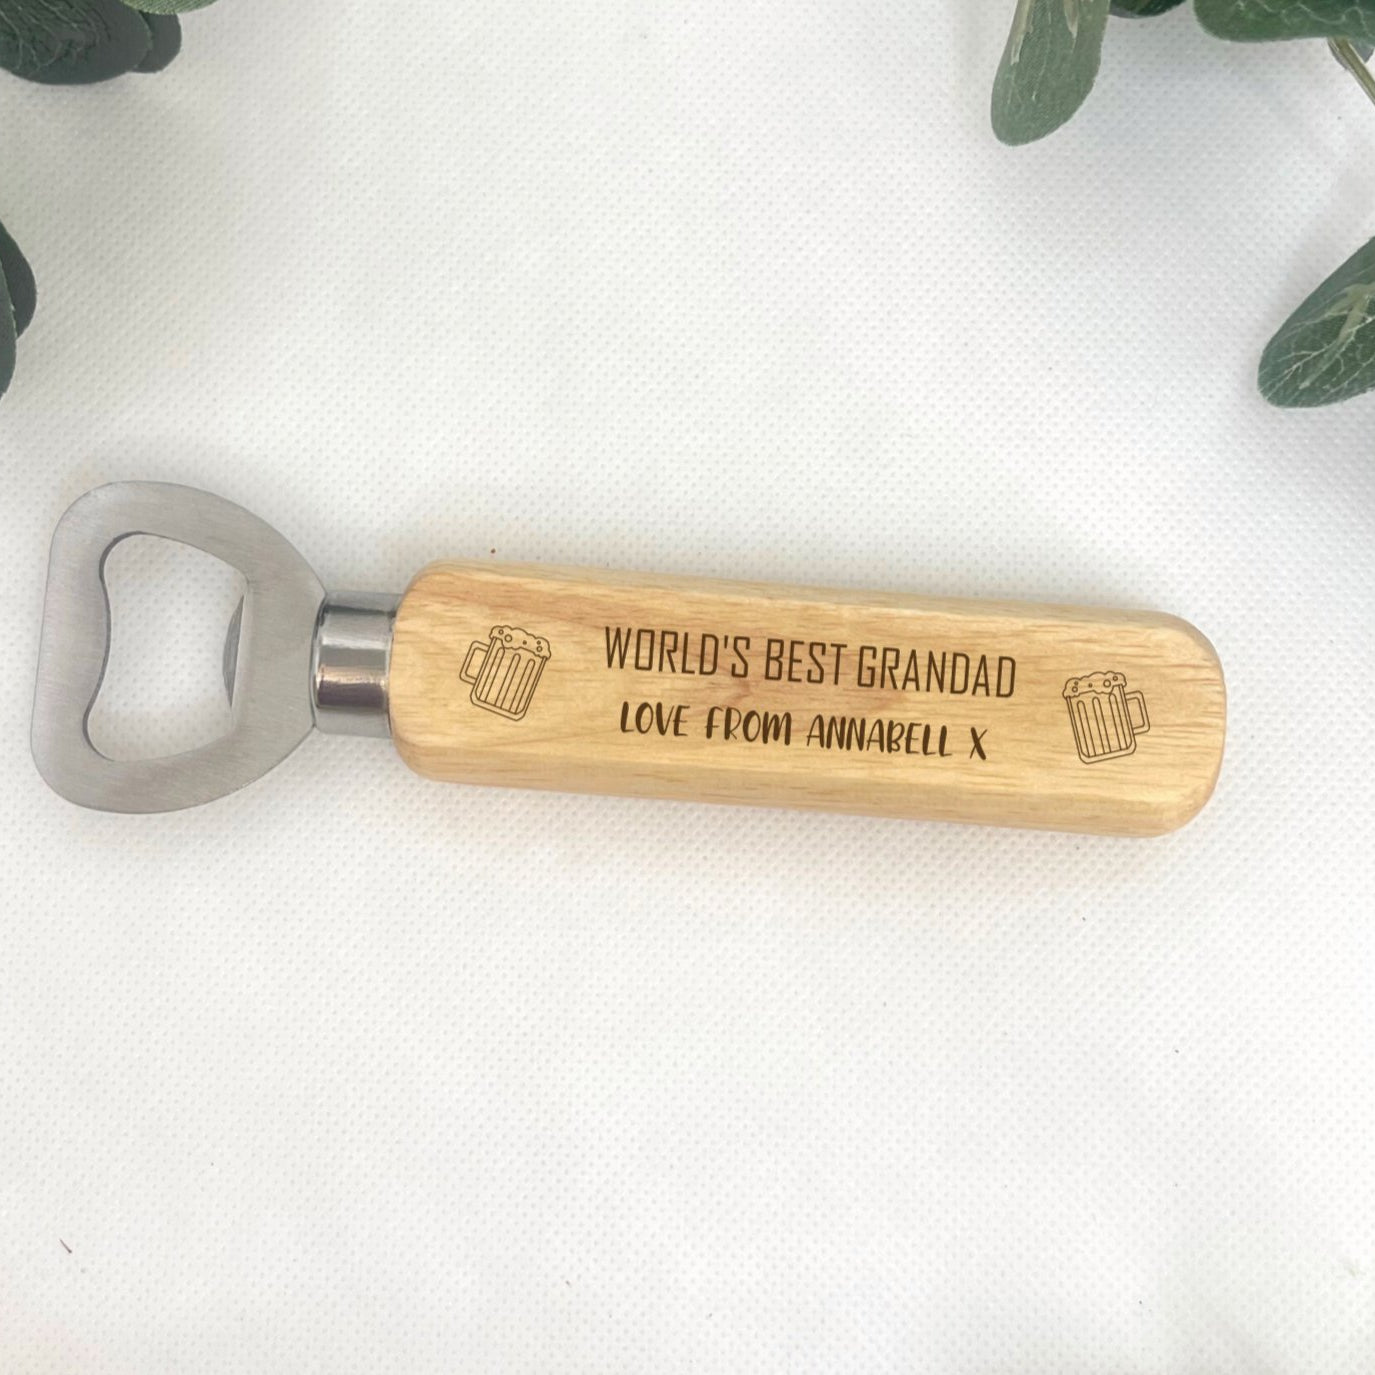 Personalised Wooden Bottle Opener - Handcrafted from top-quality wood and stainless steel - Customisable 'World's Best' engraving - Add a heartfelt 'love from' message - Charming beer jug icon - The perfect gift for Dad, Uncle, Grandfather, or any loved one.